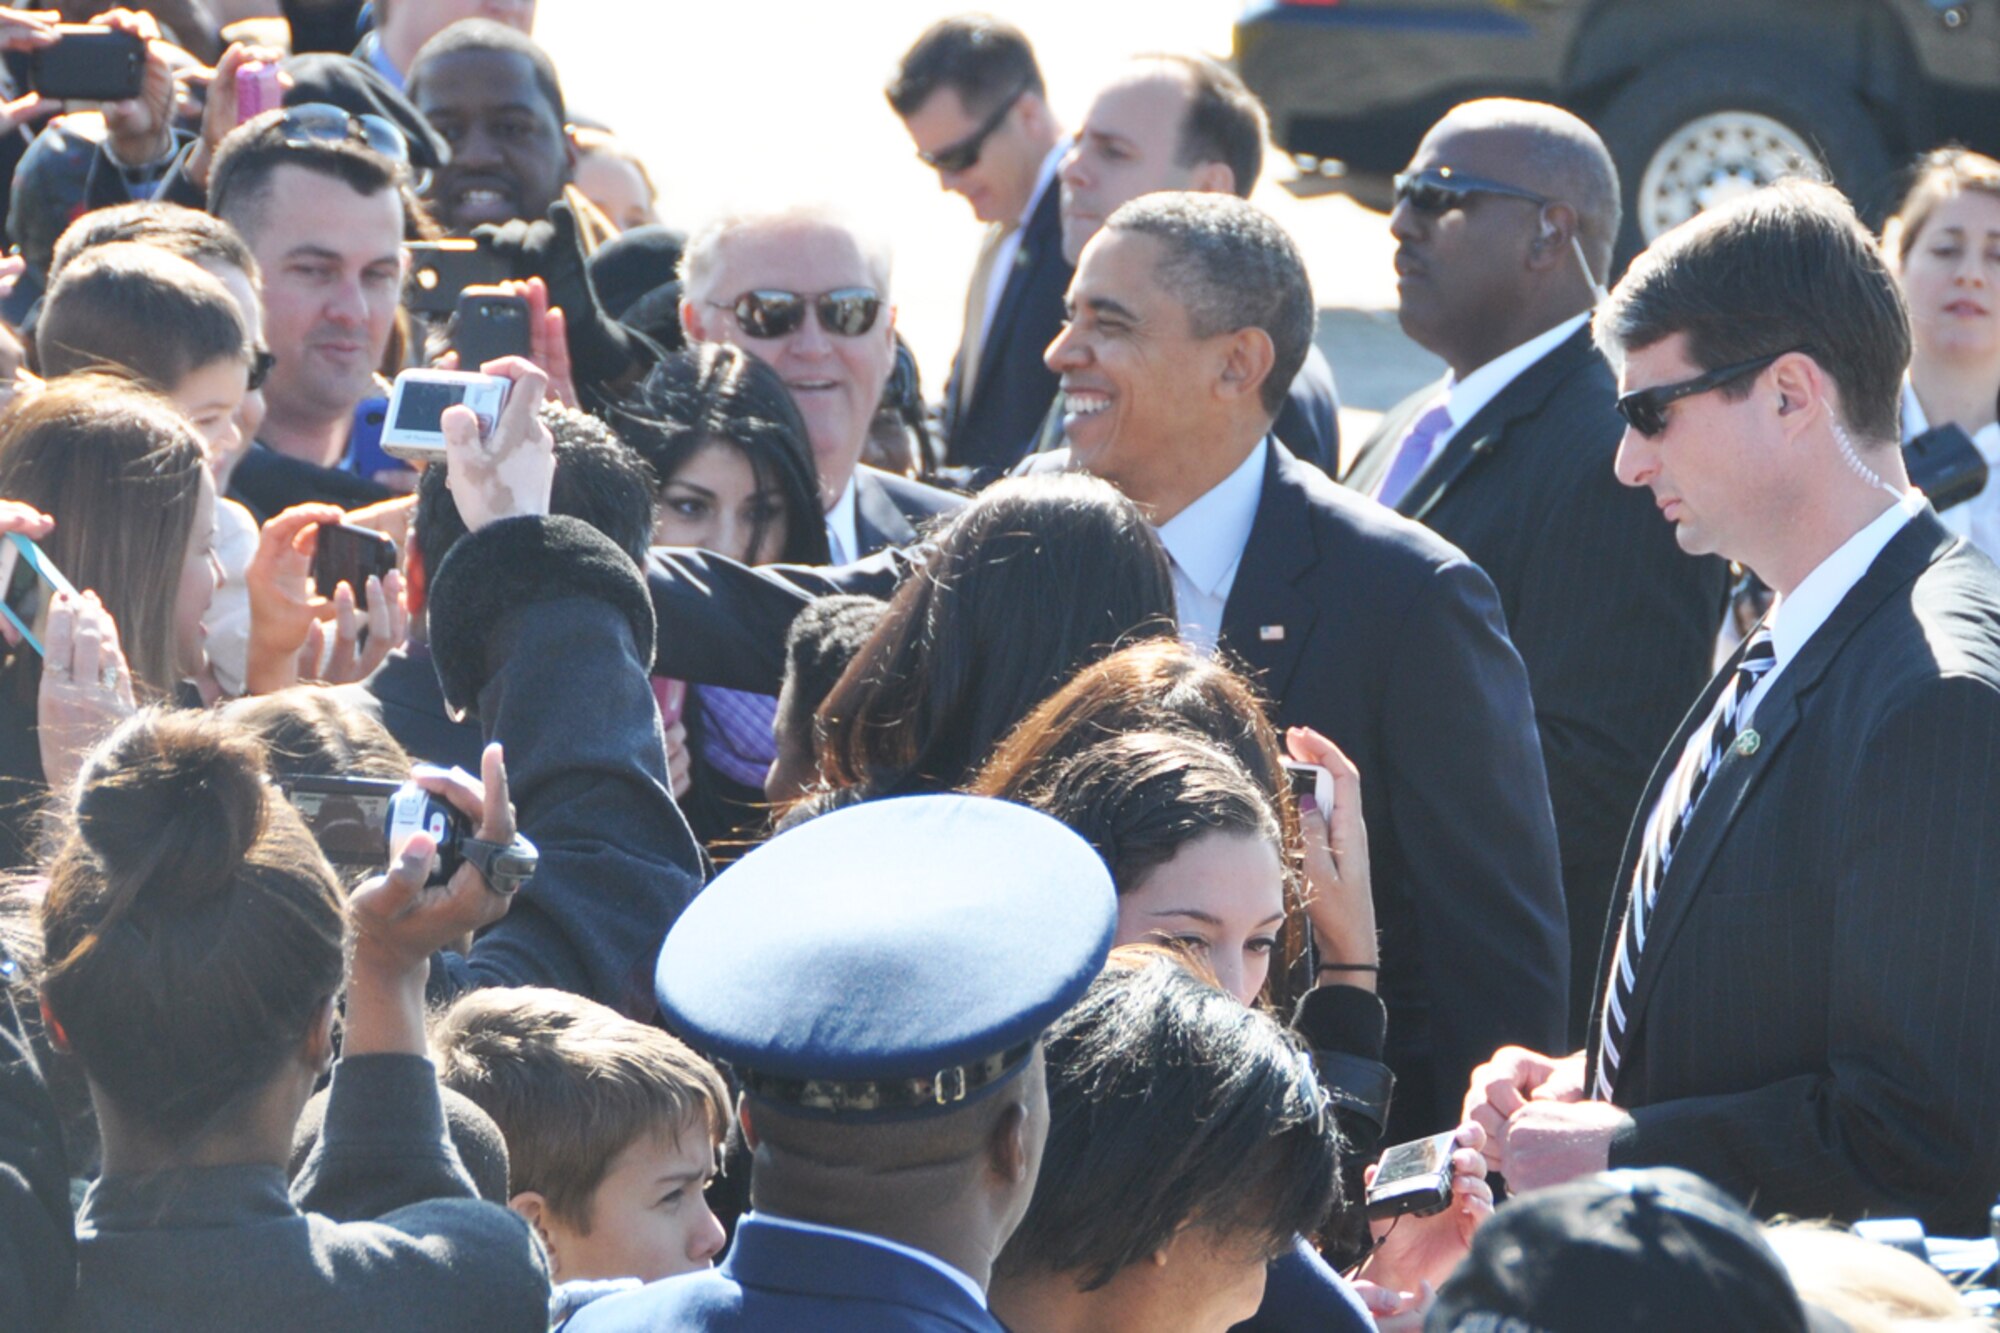 President Barack Obama greets guests during his visit to Dobbins Air Reserve Base, Feb. 14. The president was en-route to the City of Decatur Recreation Center to discuss proposals outlined in his recent state of the union address. (U.S. Air Force photo/James Branch)